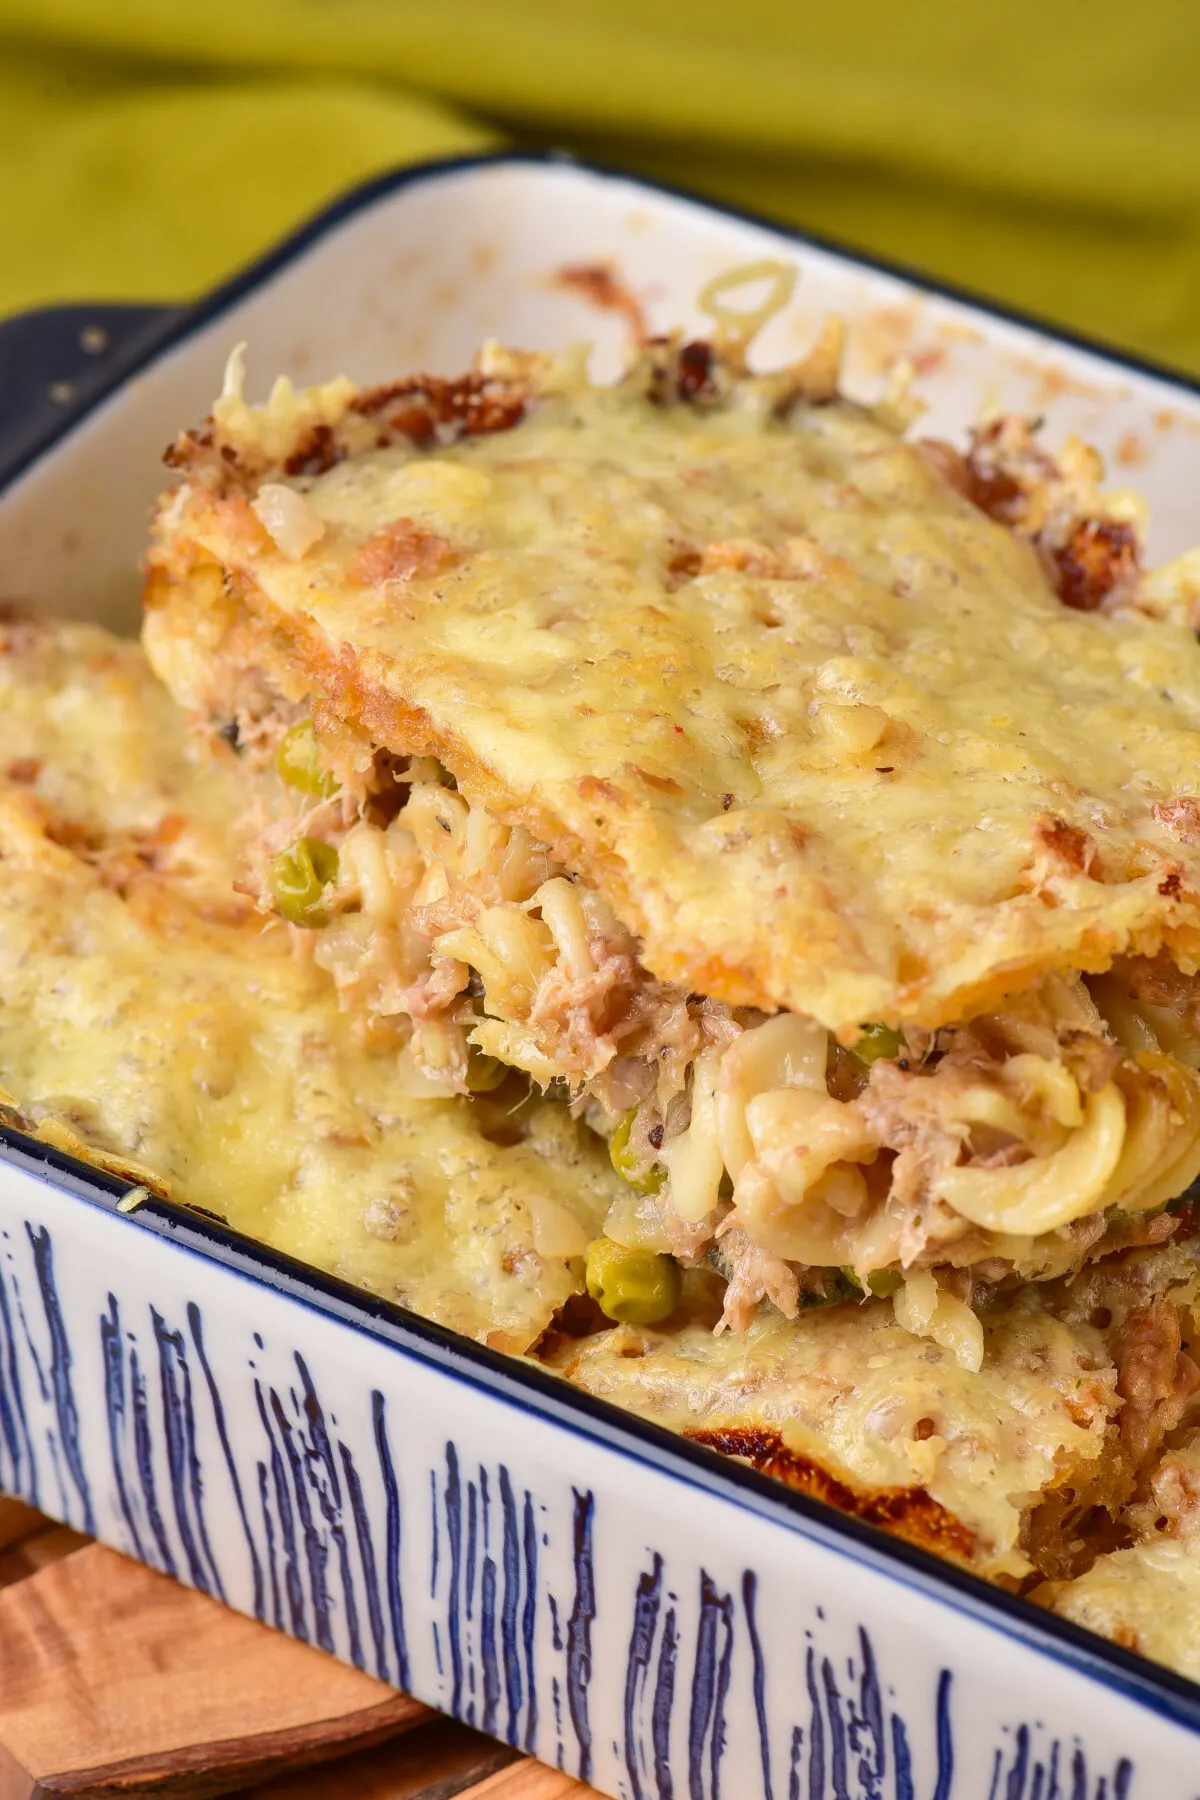 This recipe for Old Fashioned Tuna Casserole is nostalgic and delicious. It's perfect for a family dinner or potluck!